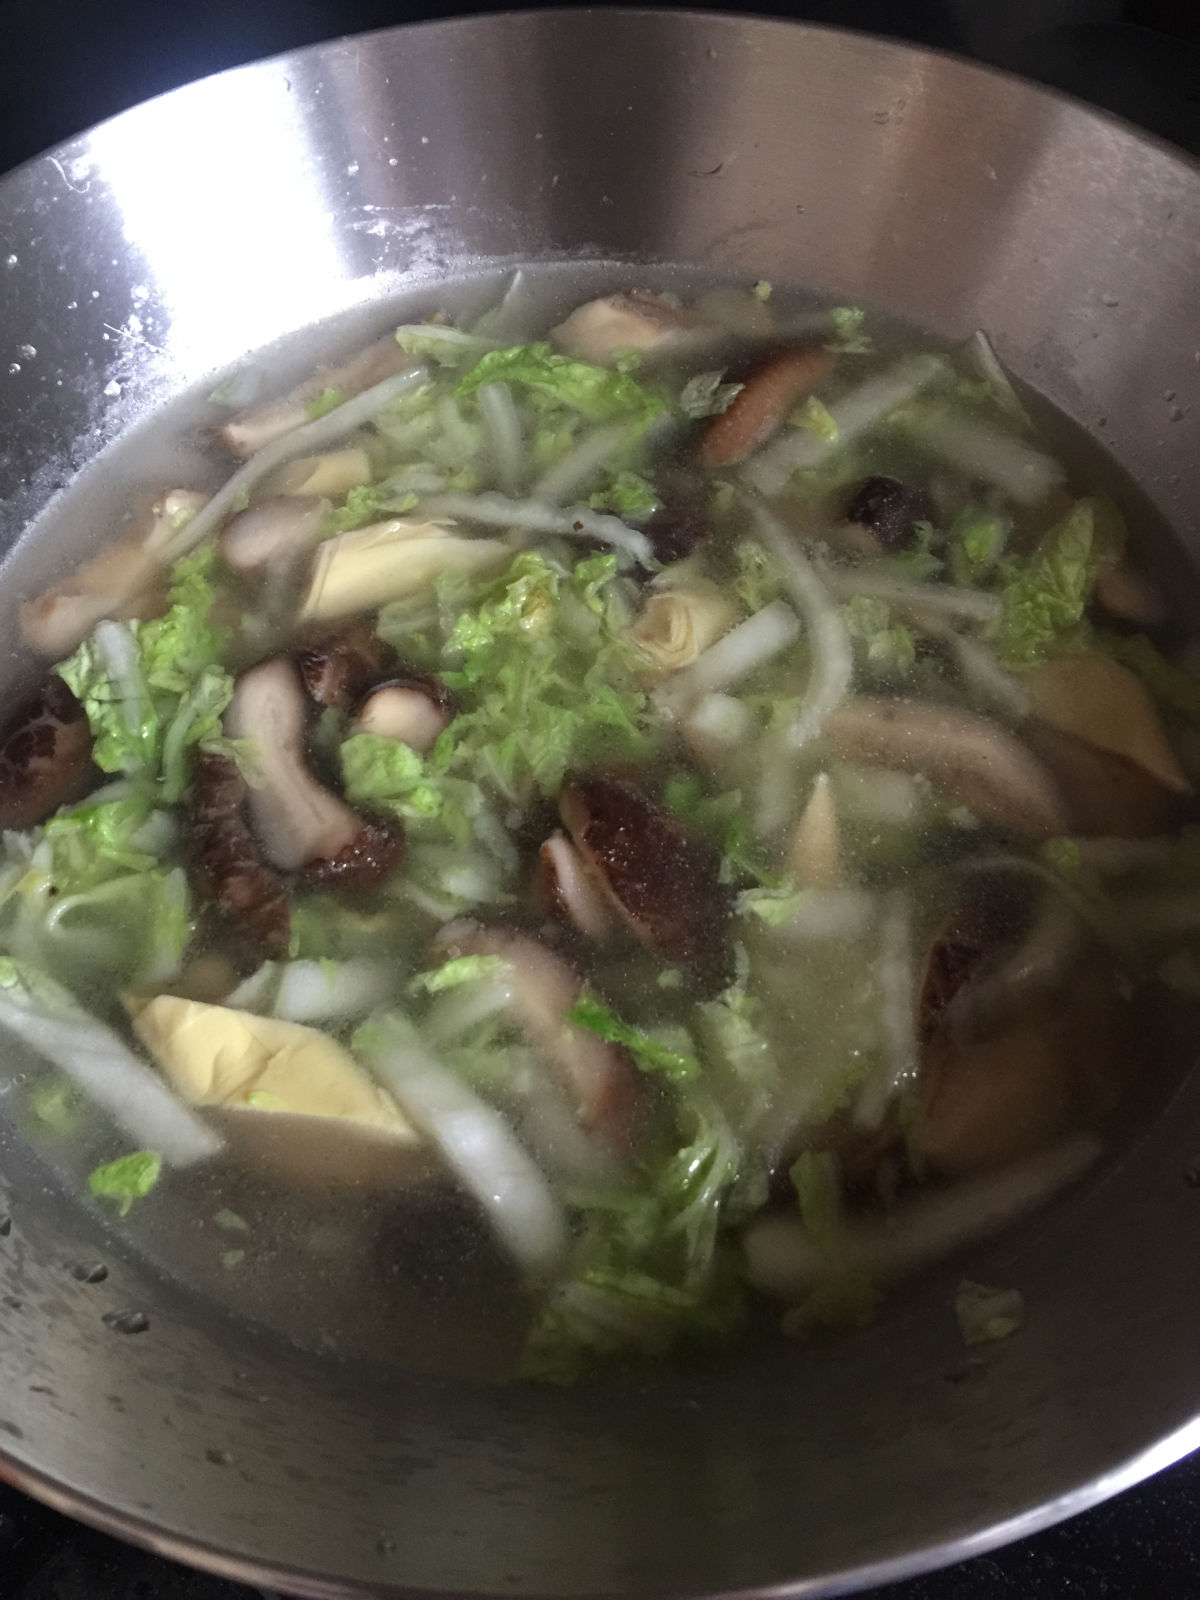 A close up view of vegetables soup cooking in a stainless steel wok.